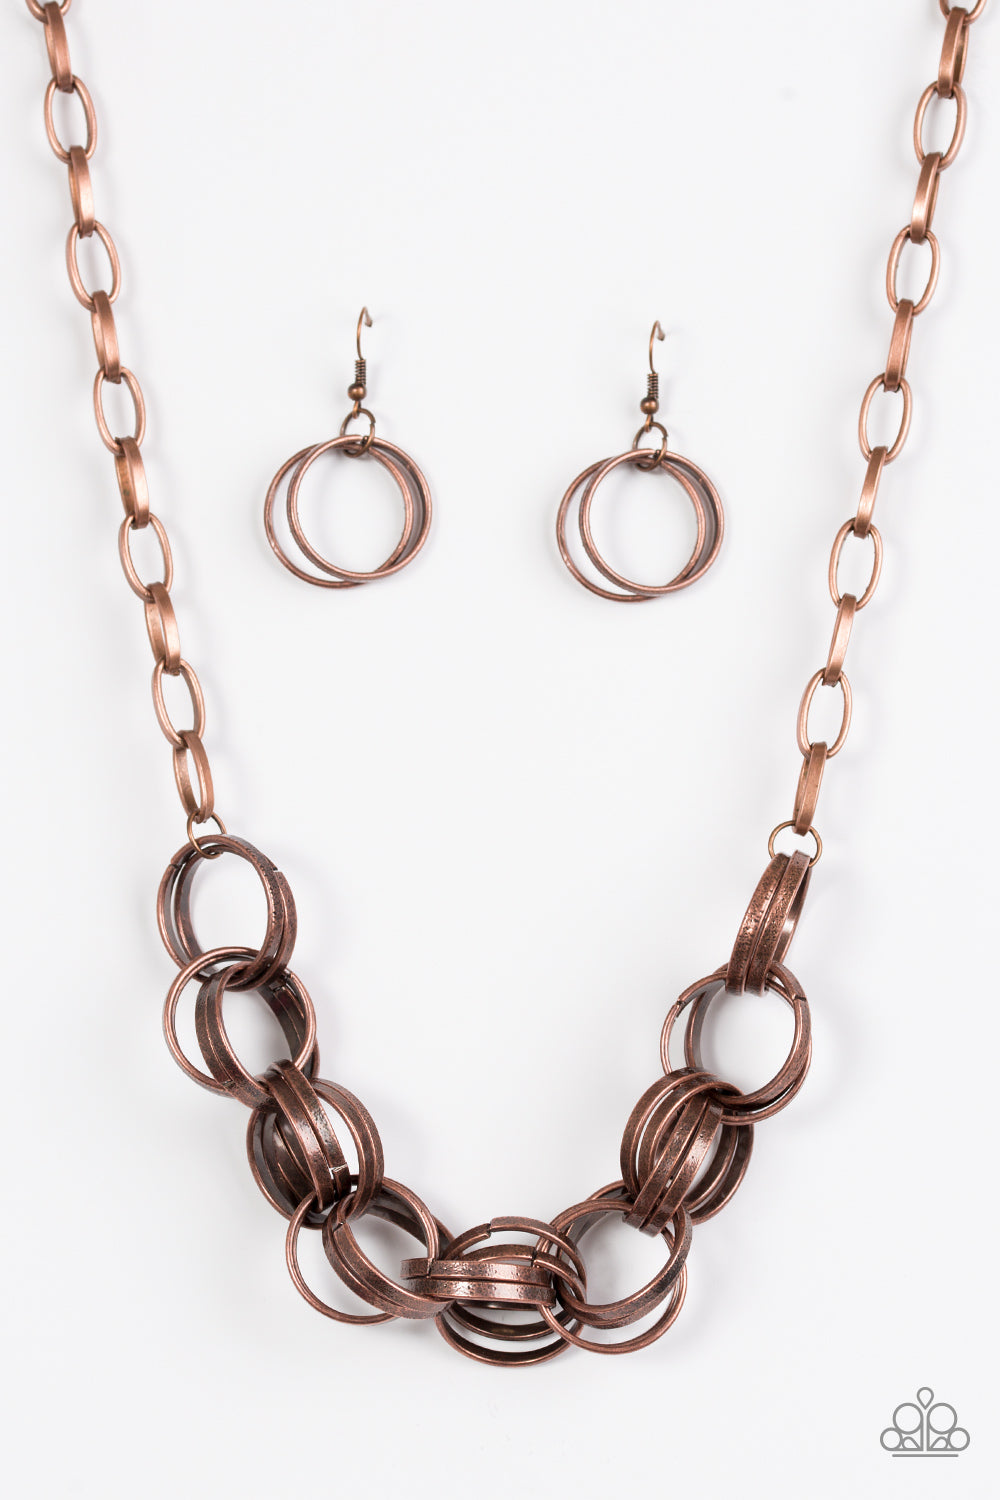 Paparazzi Necklaces - Statement Made - Copper